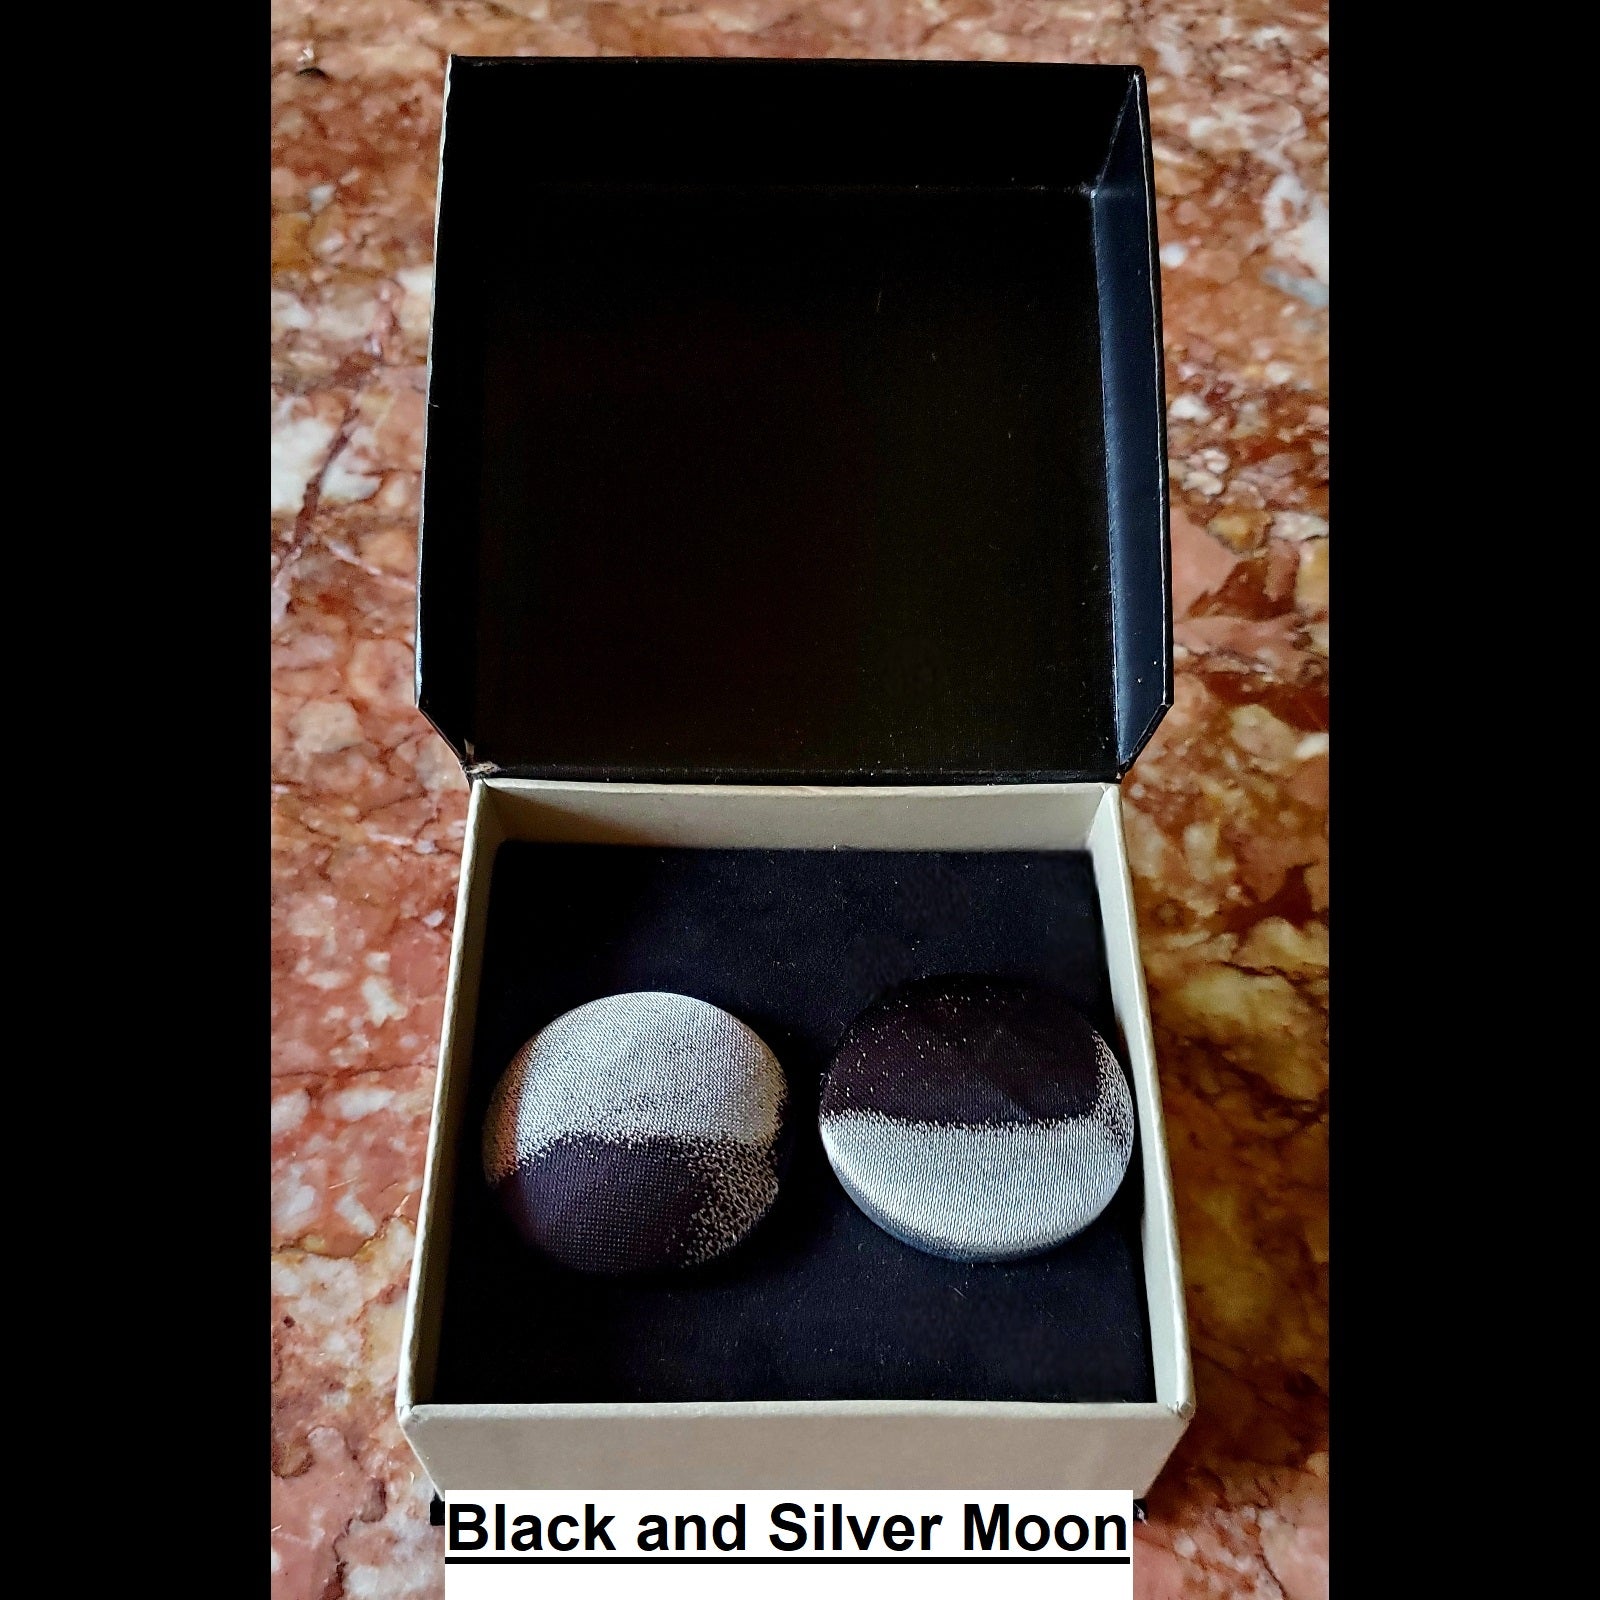 Black and silver moon inspired print button earrings in jewelry box